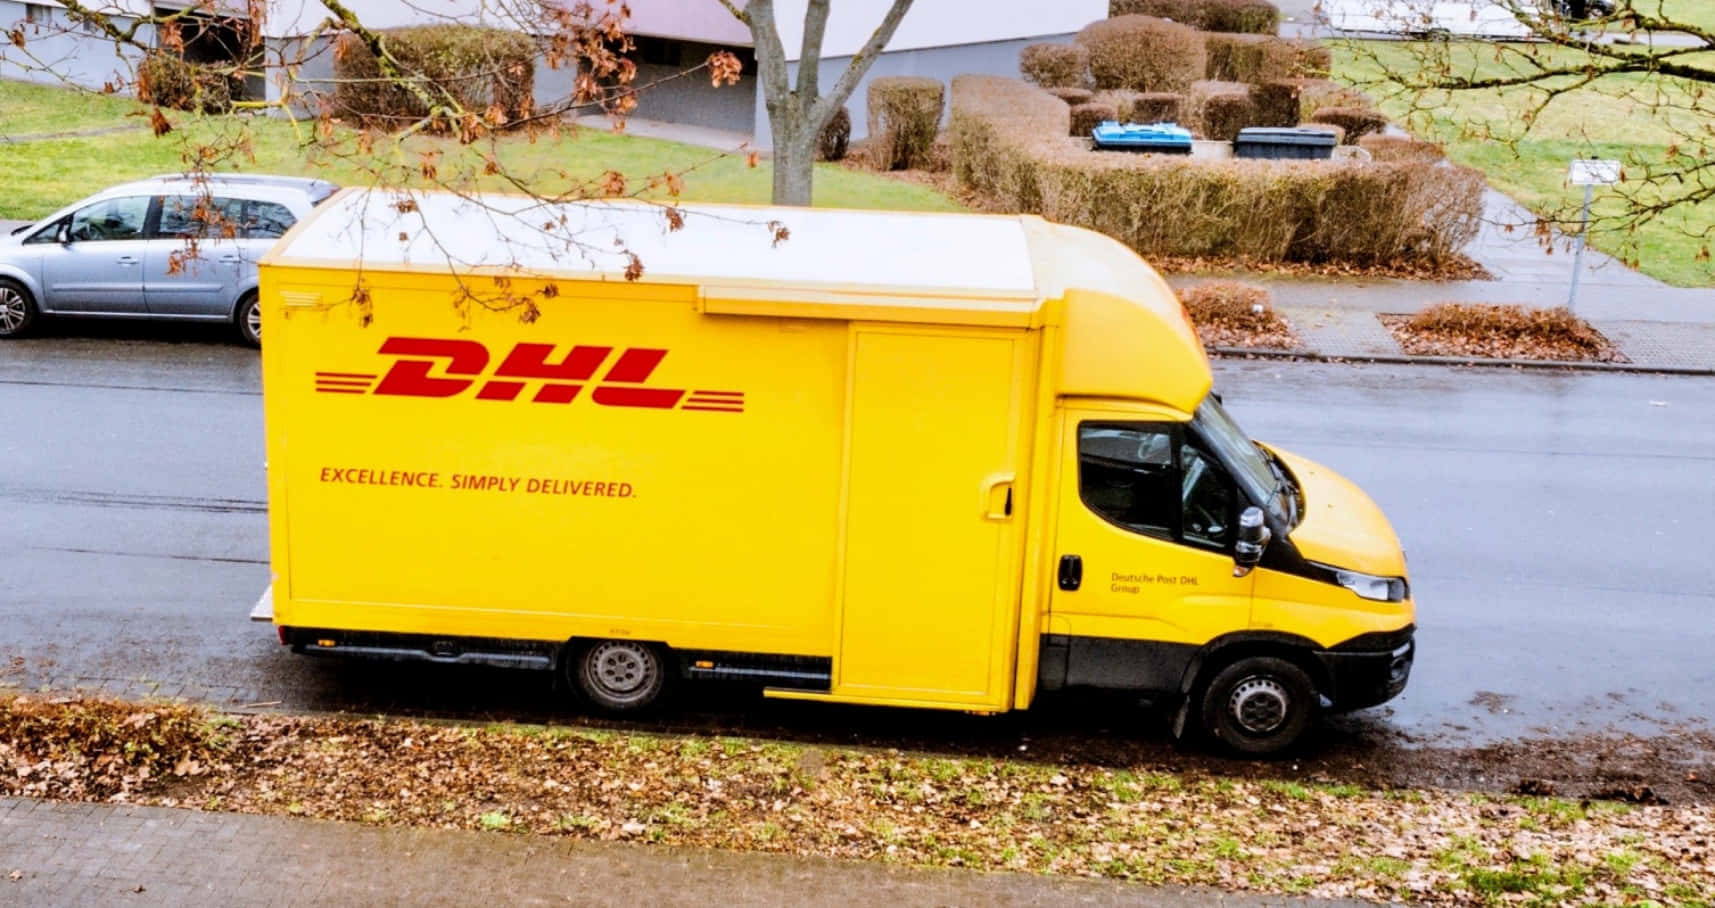 Stay connected with Dhl worldwide.